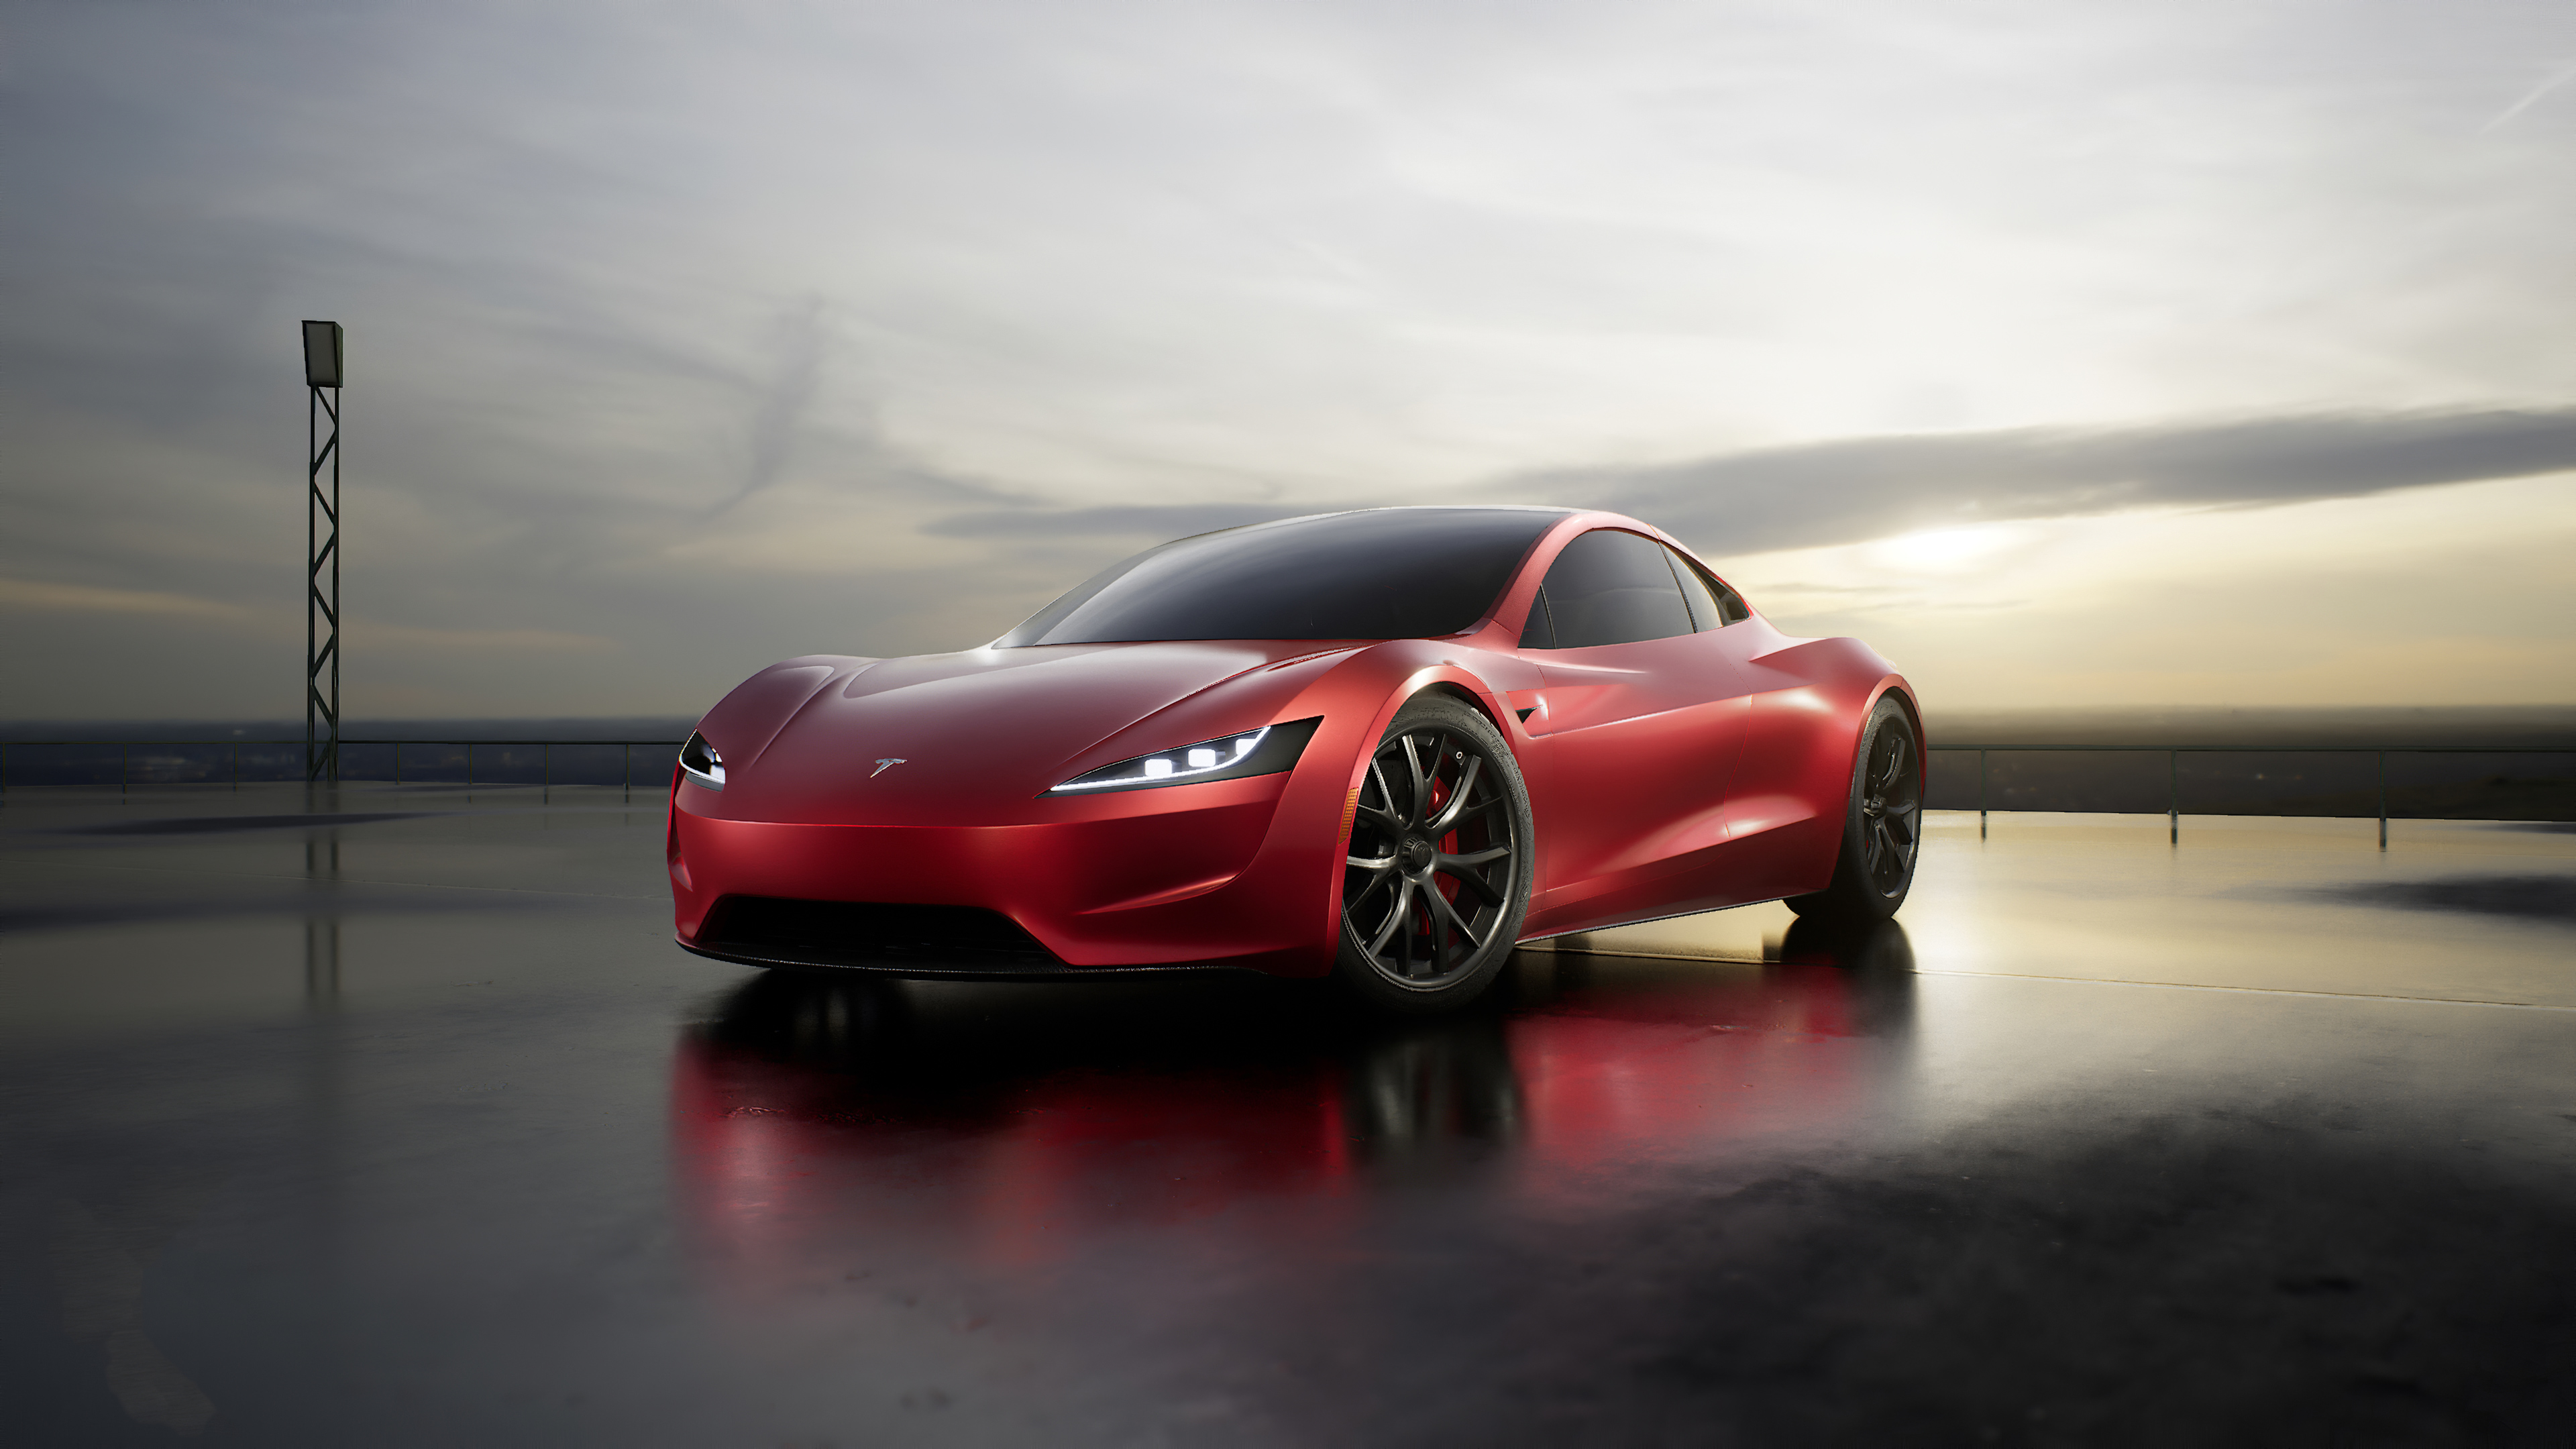 General 3840x2160 Tesla Roadster car vehicle red cars electric car frontal view